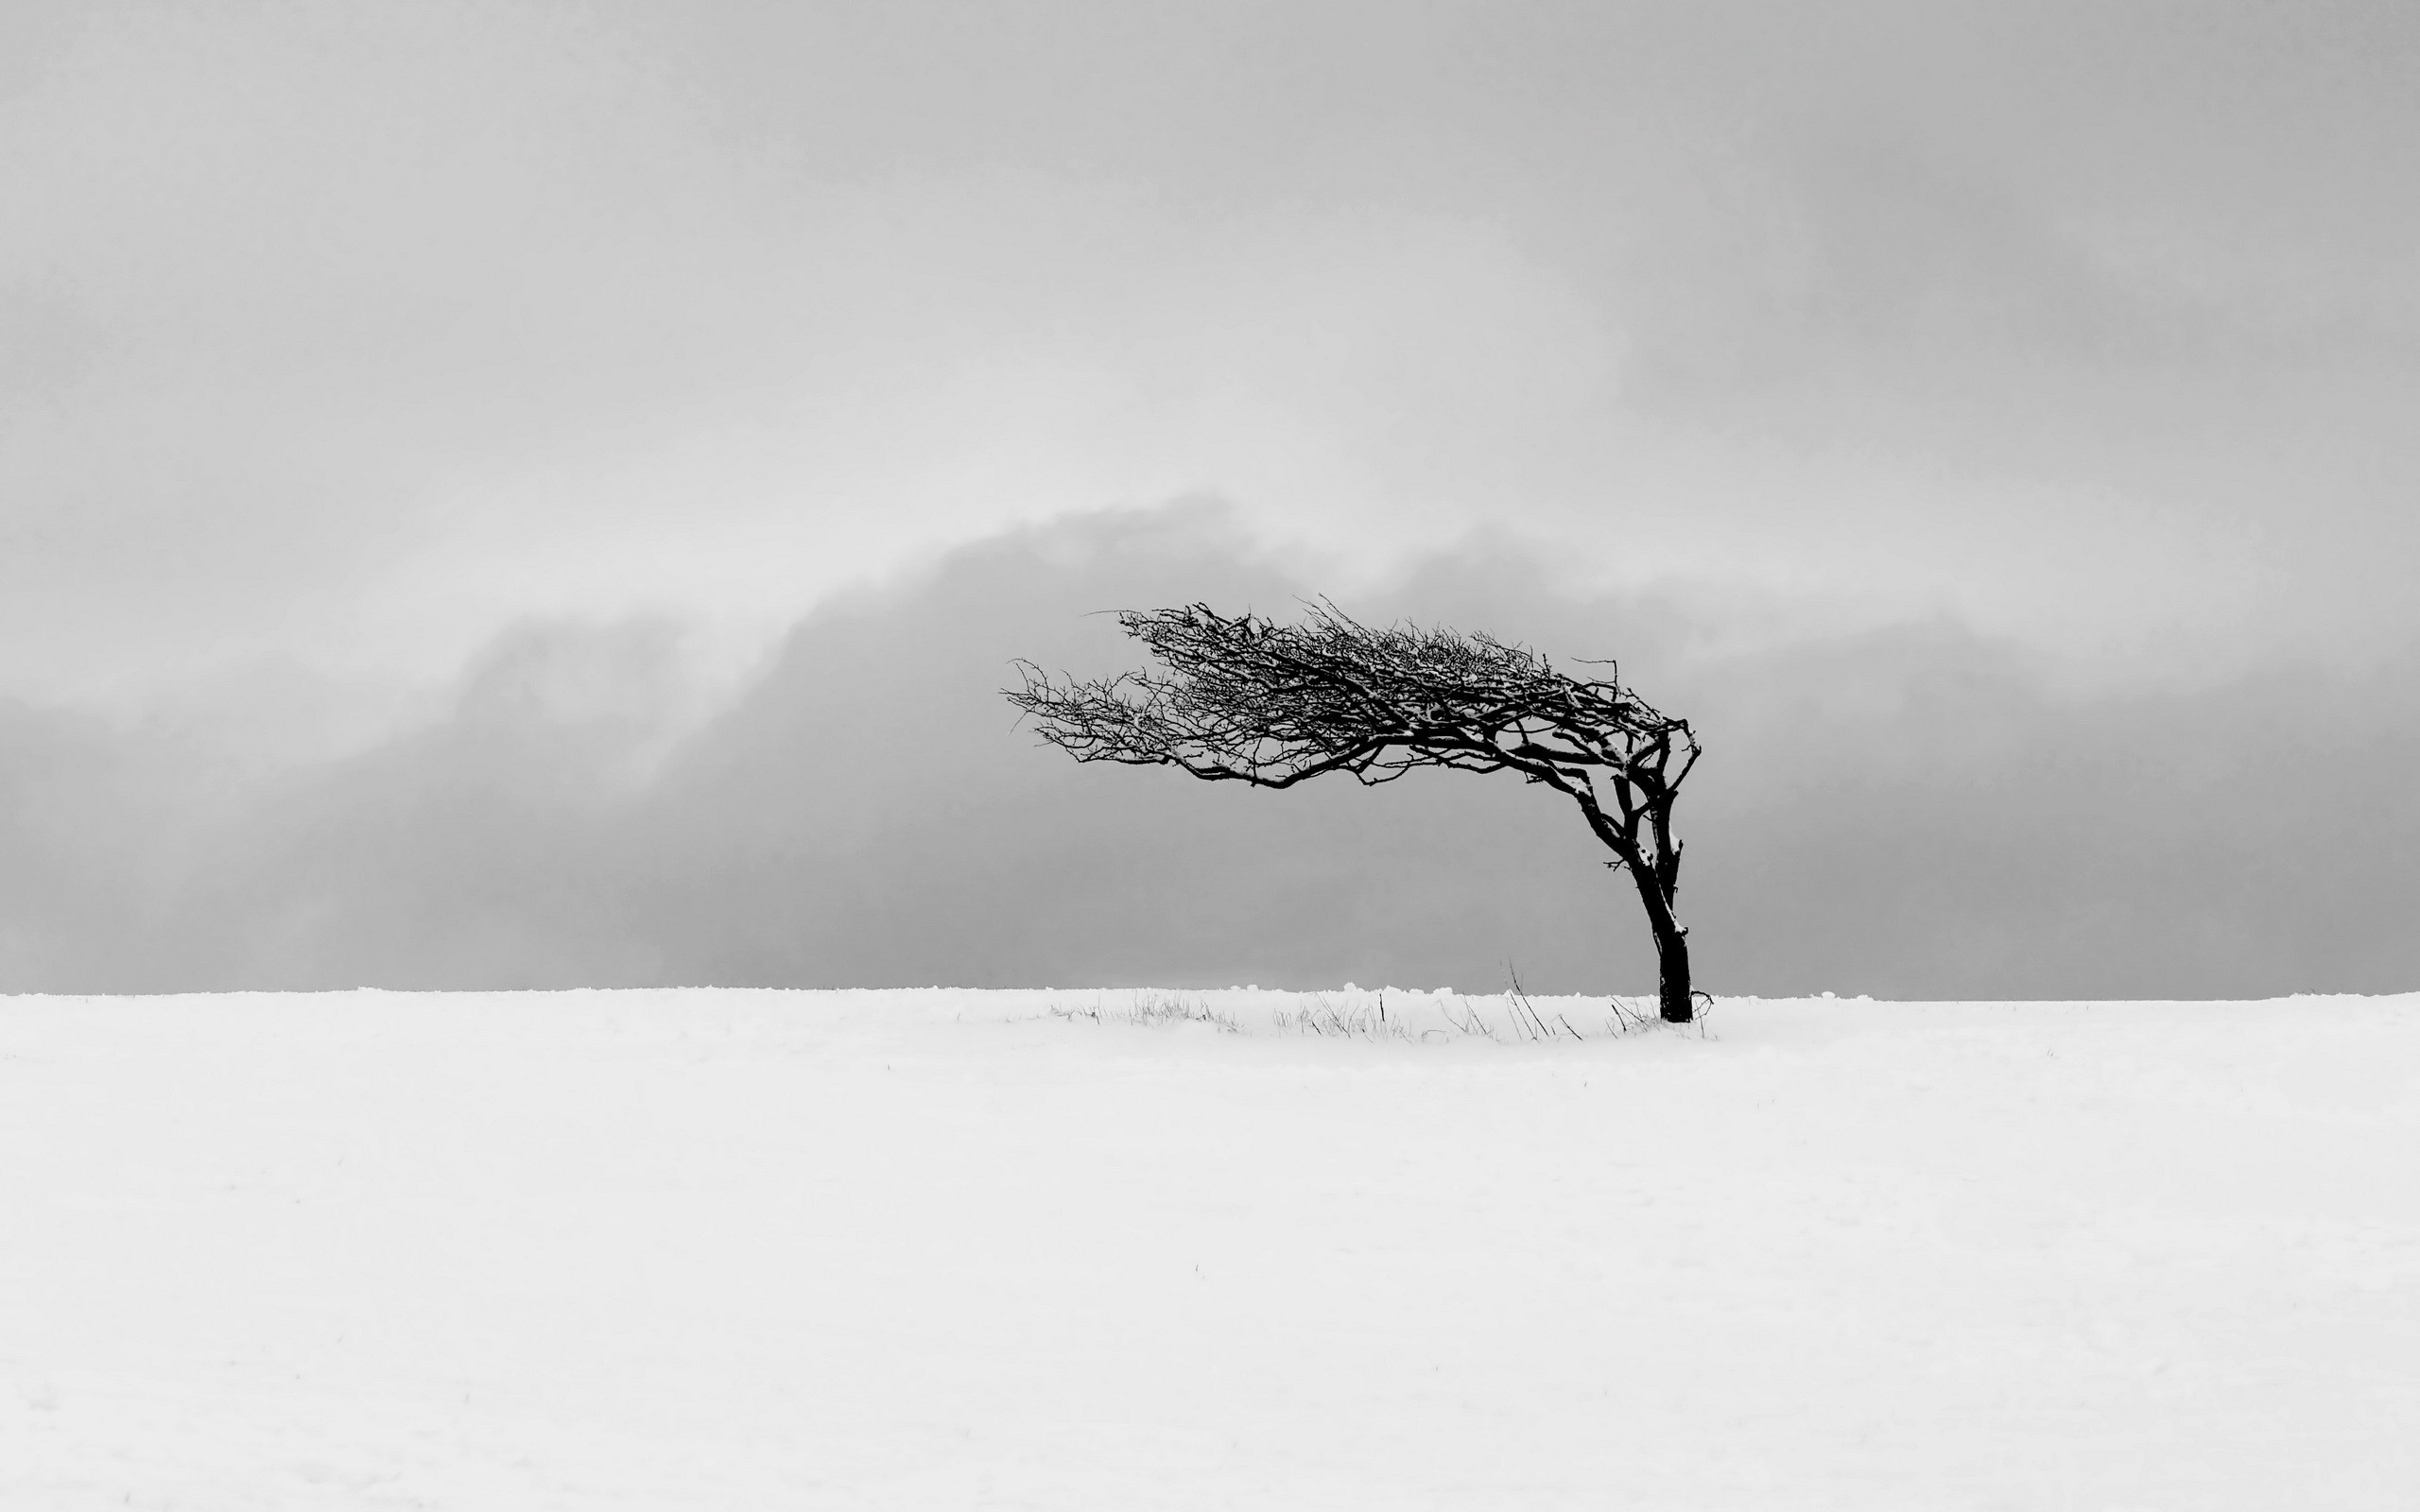 Wallpaper, trees, drawing, nature, minimalism, snow, branch, mist, frost, wind, Freezing, cloud, tree, fog, weather, season, blizzard, atmospheric phenomenon, black and white, monochrome photography, winter storm 2560x1600